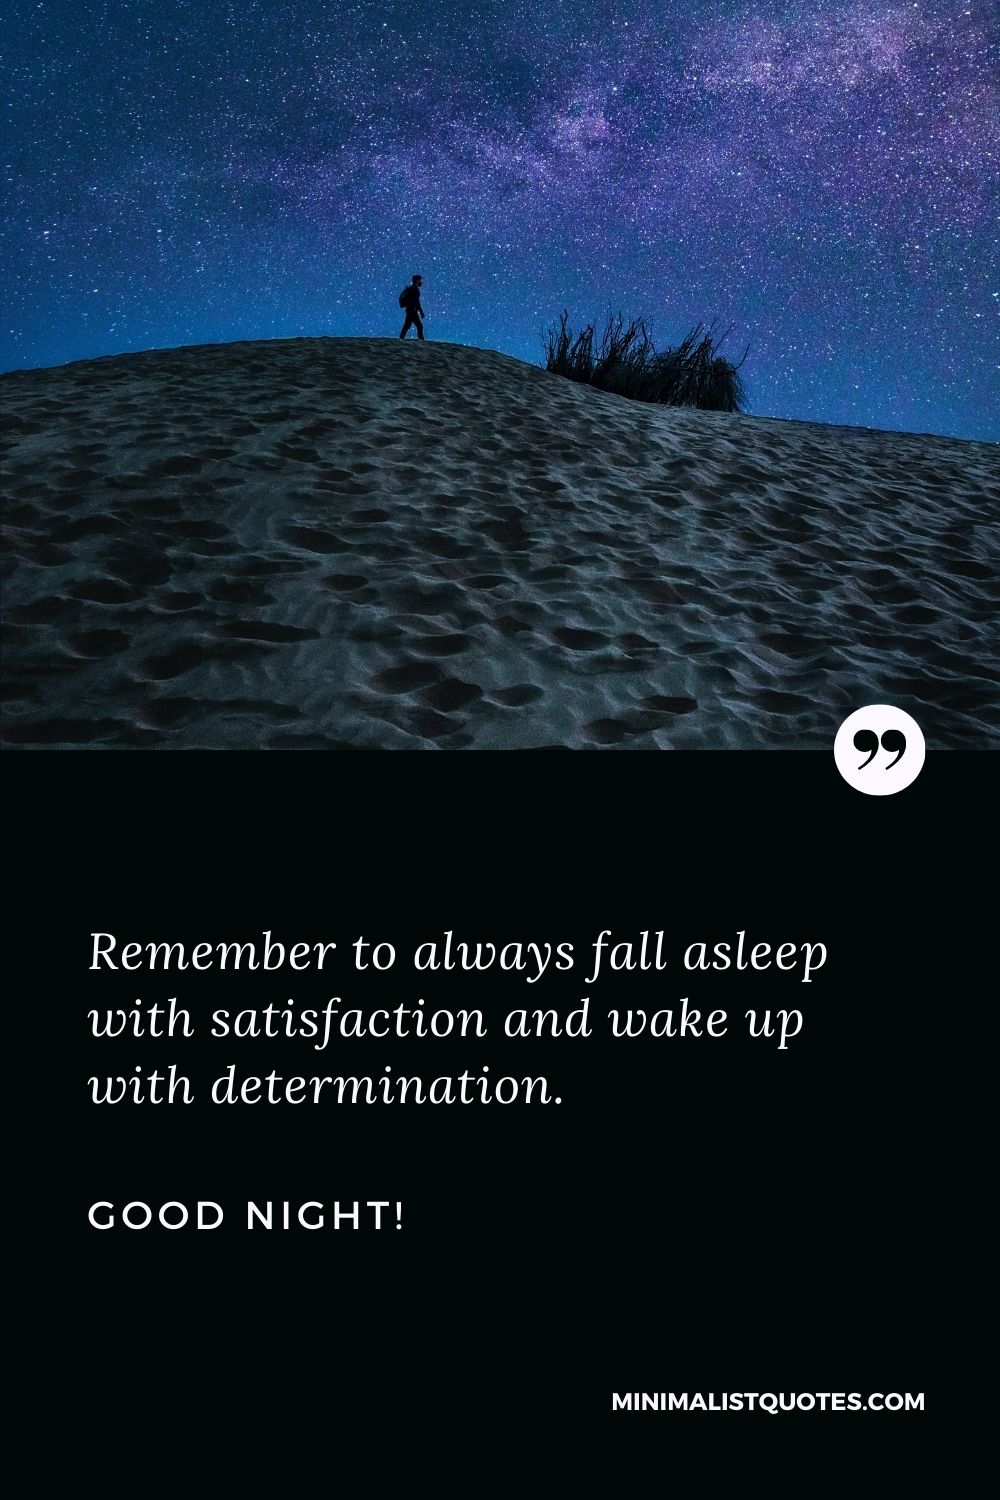 Good night blessing: Remember to always fall asleep with satisfaction and wake up with determination. Good Night!